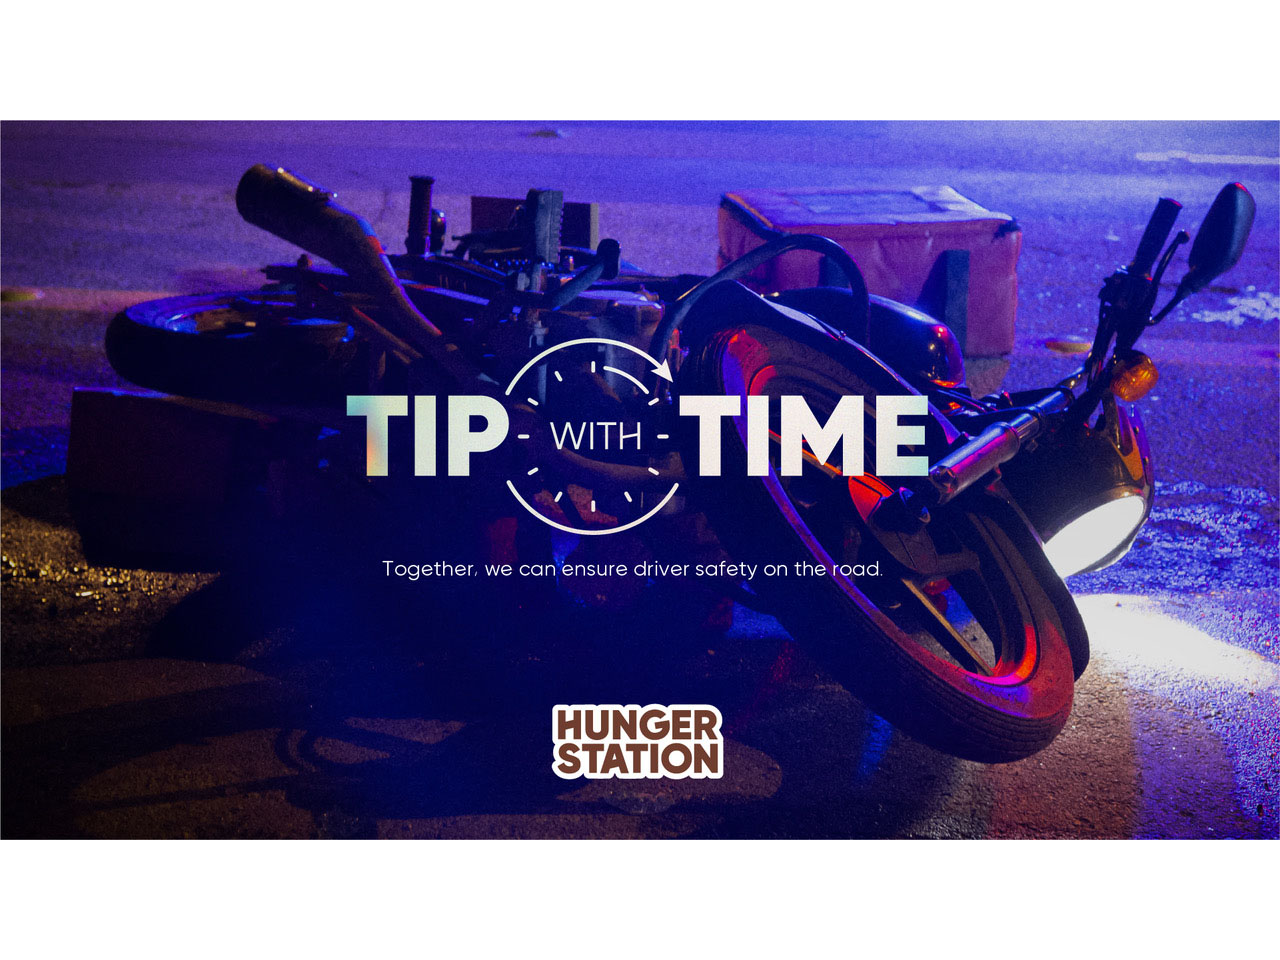 ’Tip with Time’, a smart initiative by HungerStation and Wunderman Thompson KSA to make road safer during Ramadan